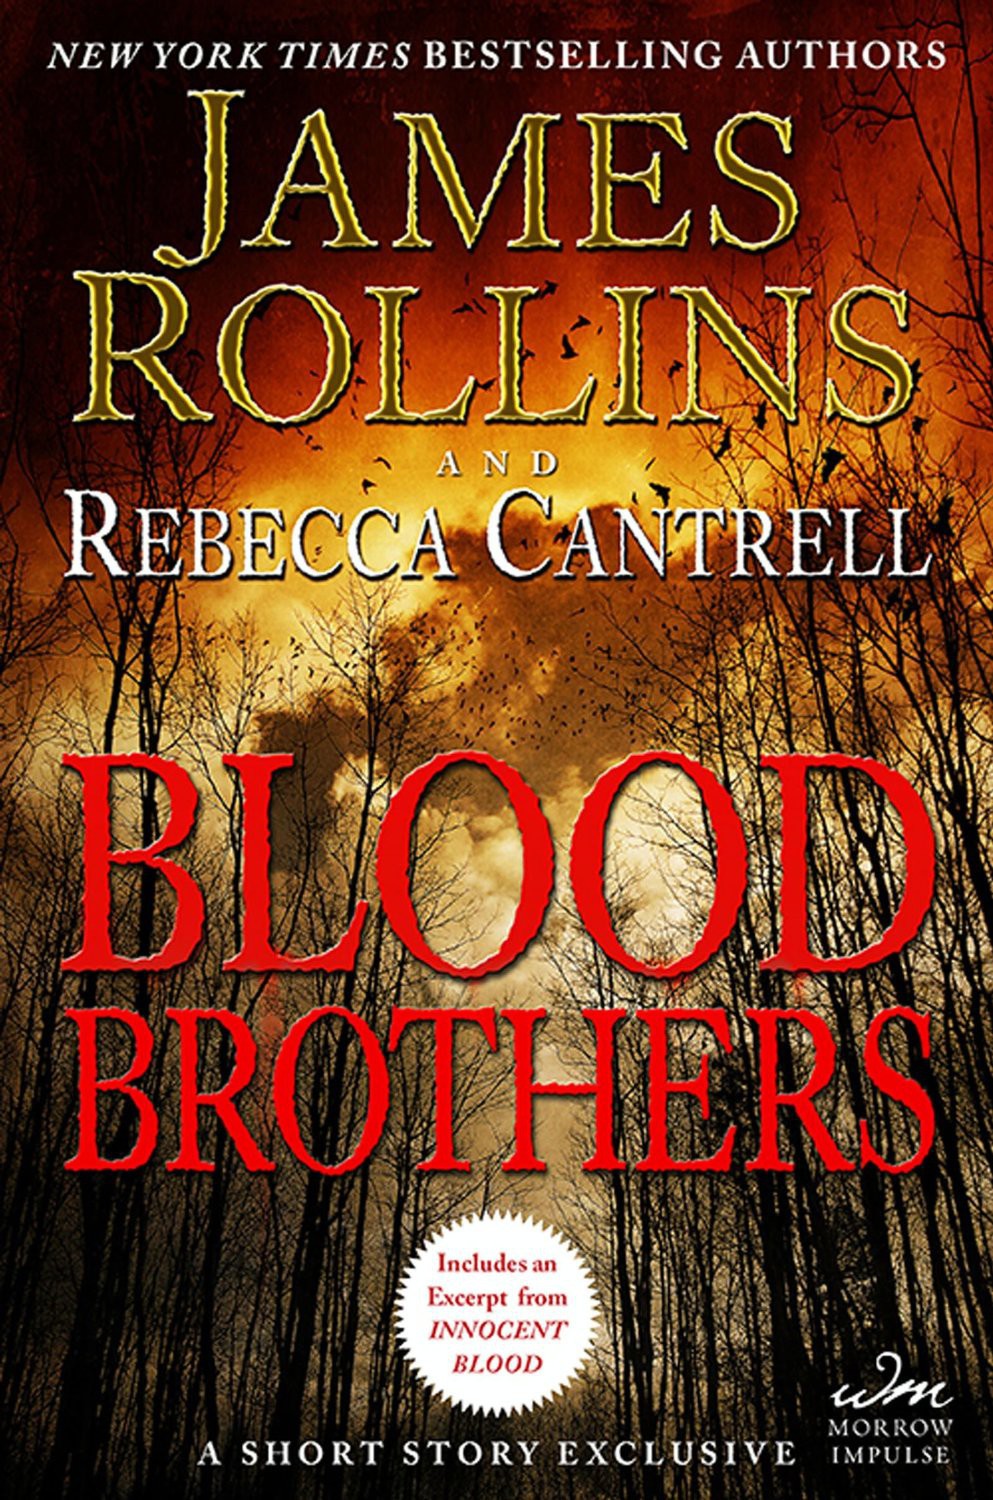 Blood Brothers: A Short Story Exclusive by James Rollins